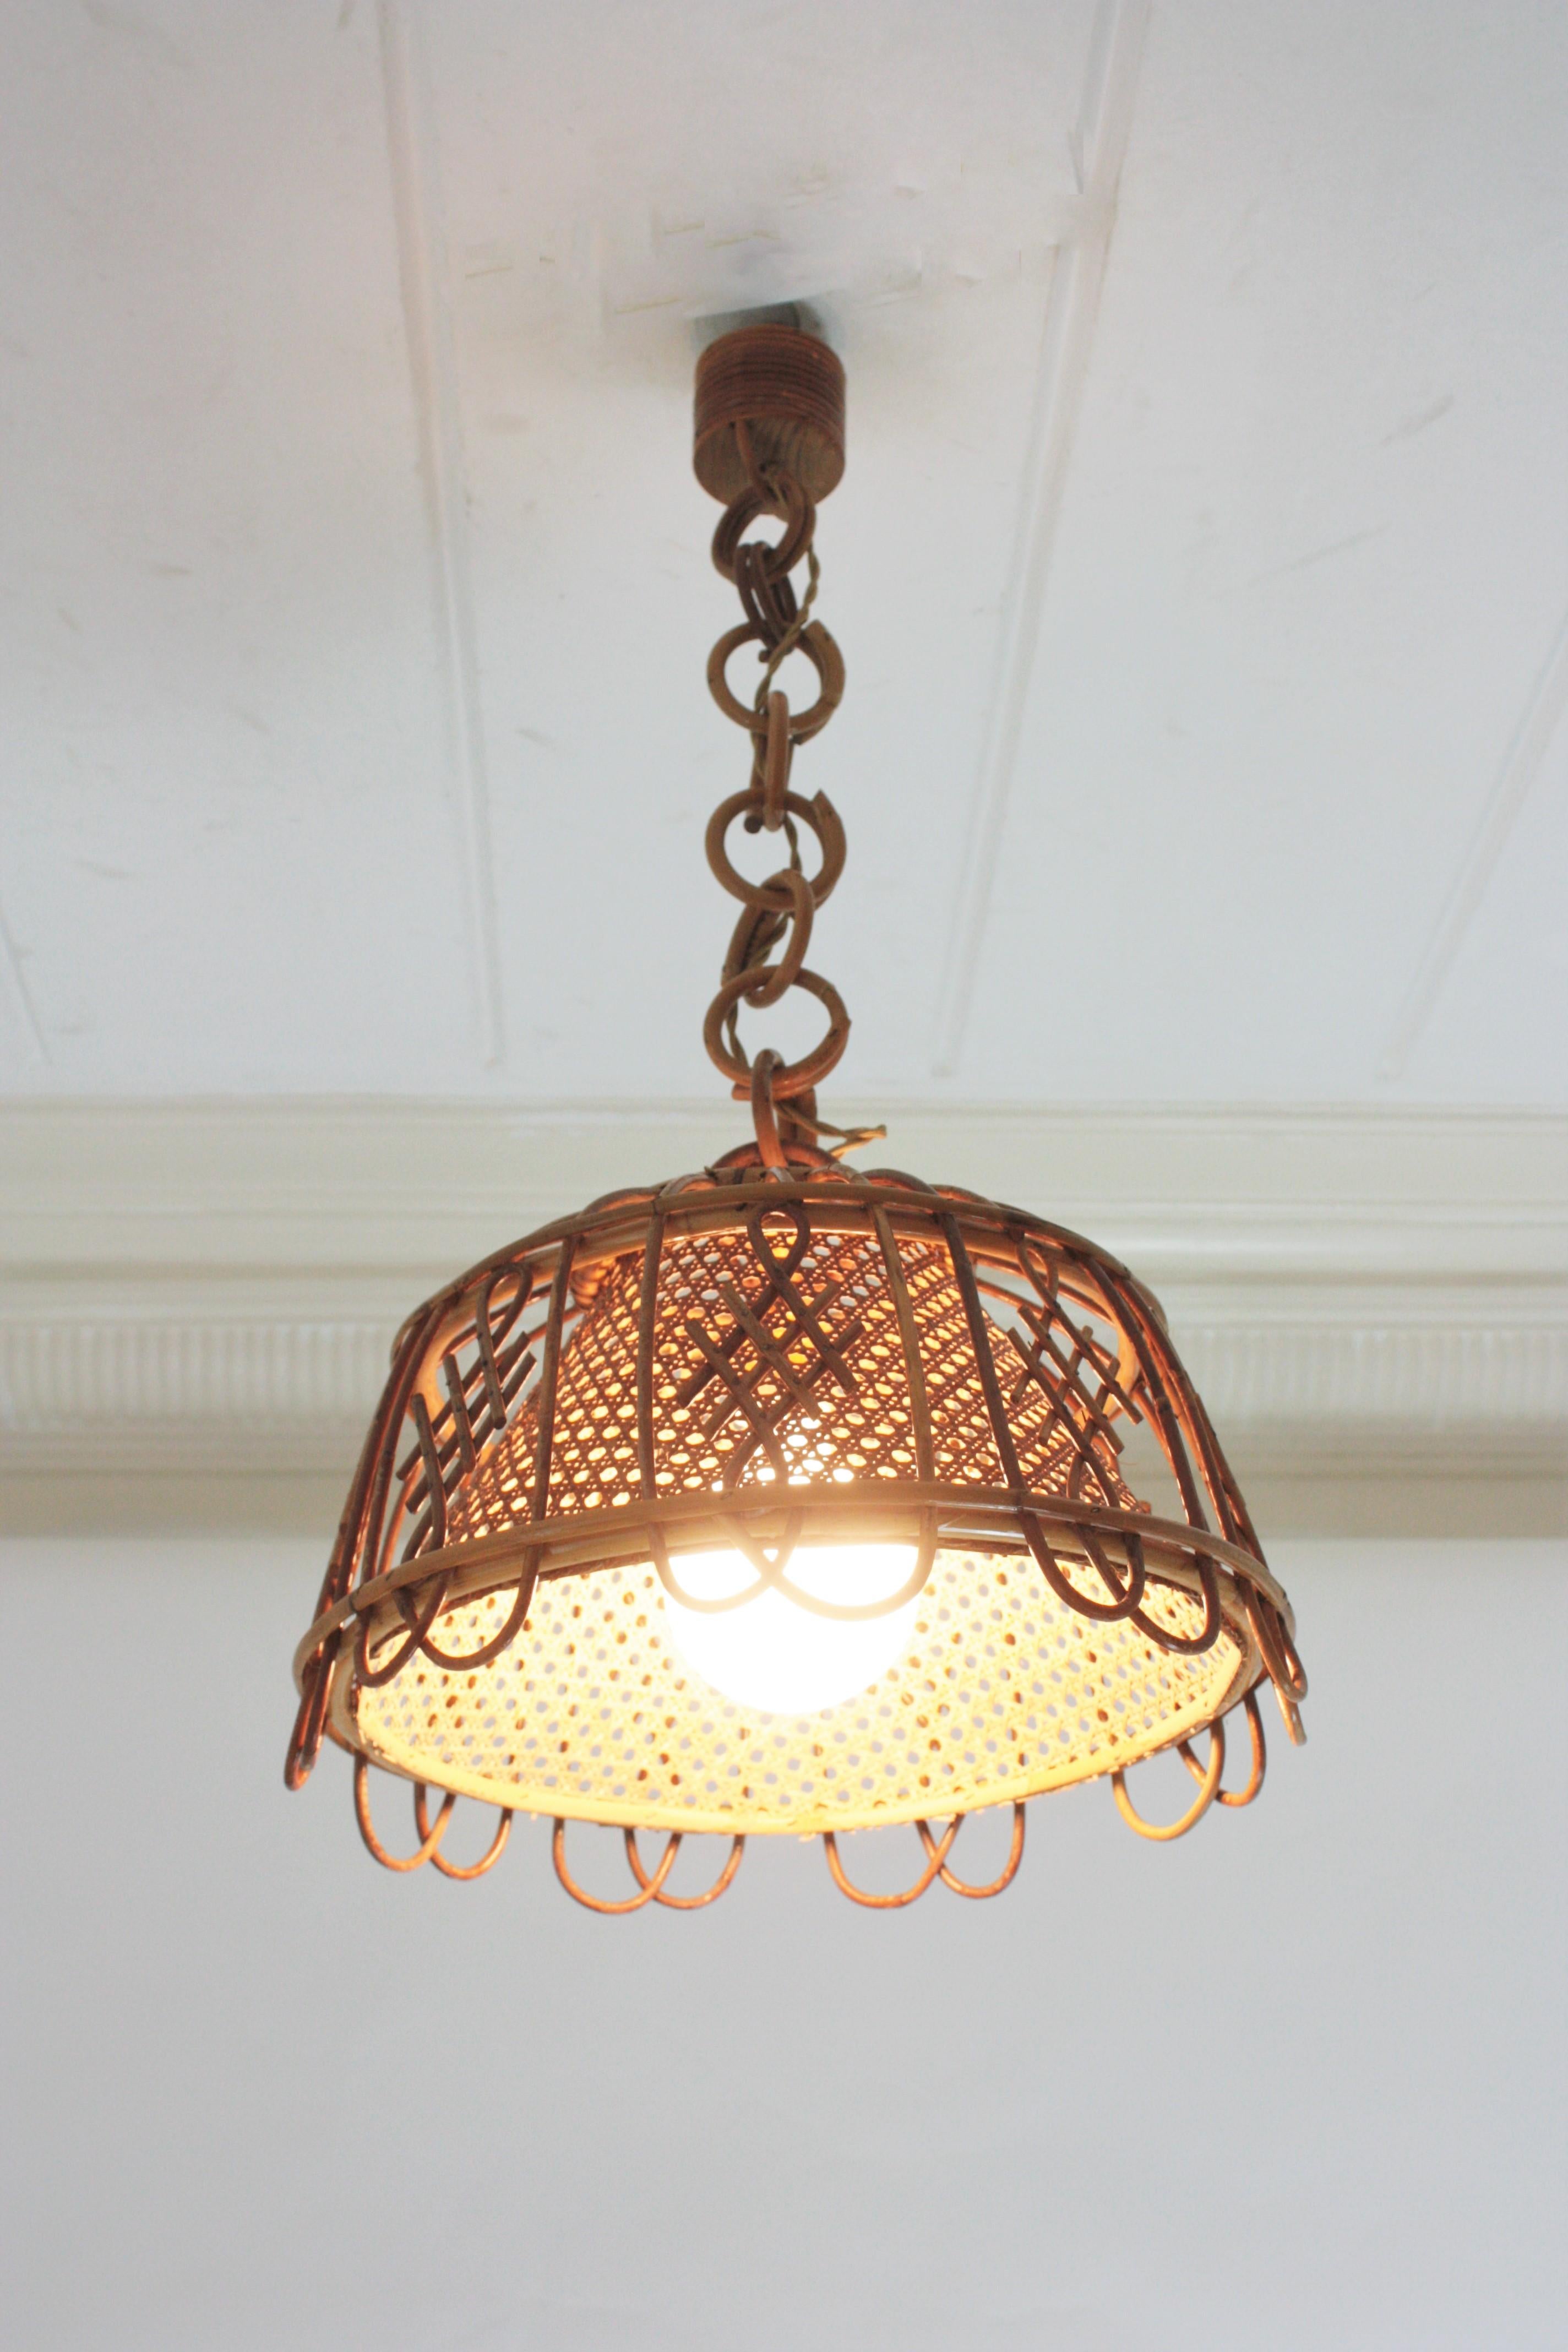 Hand-Crafted Rattan Wicker Wire Italian Modernist Pendant Hanging Light, 1960s For Sale